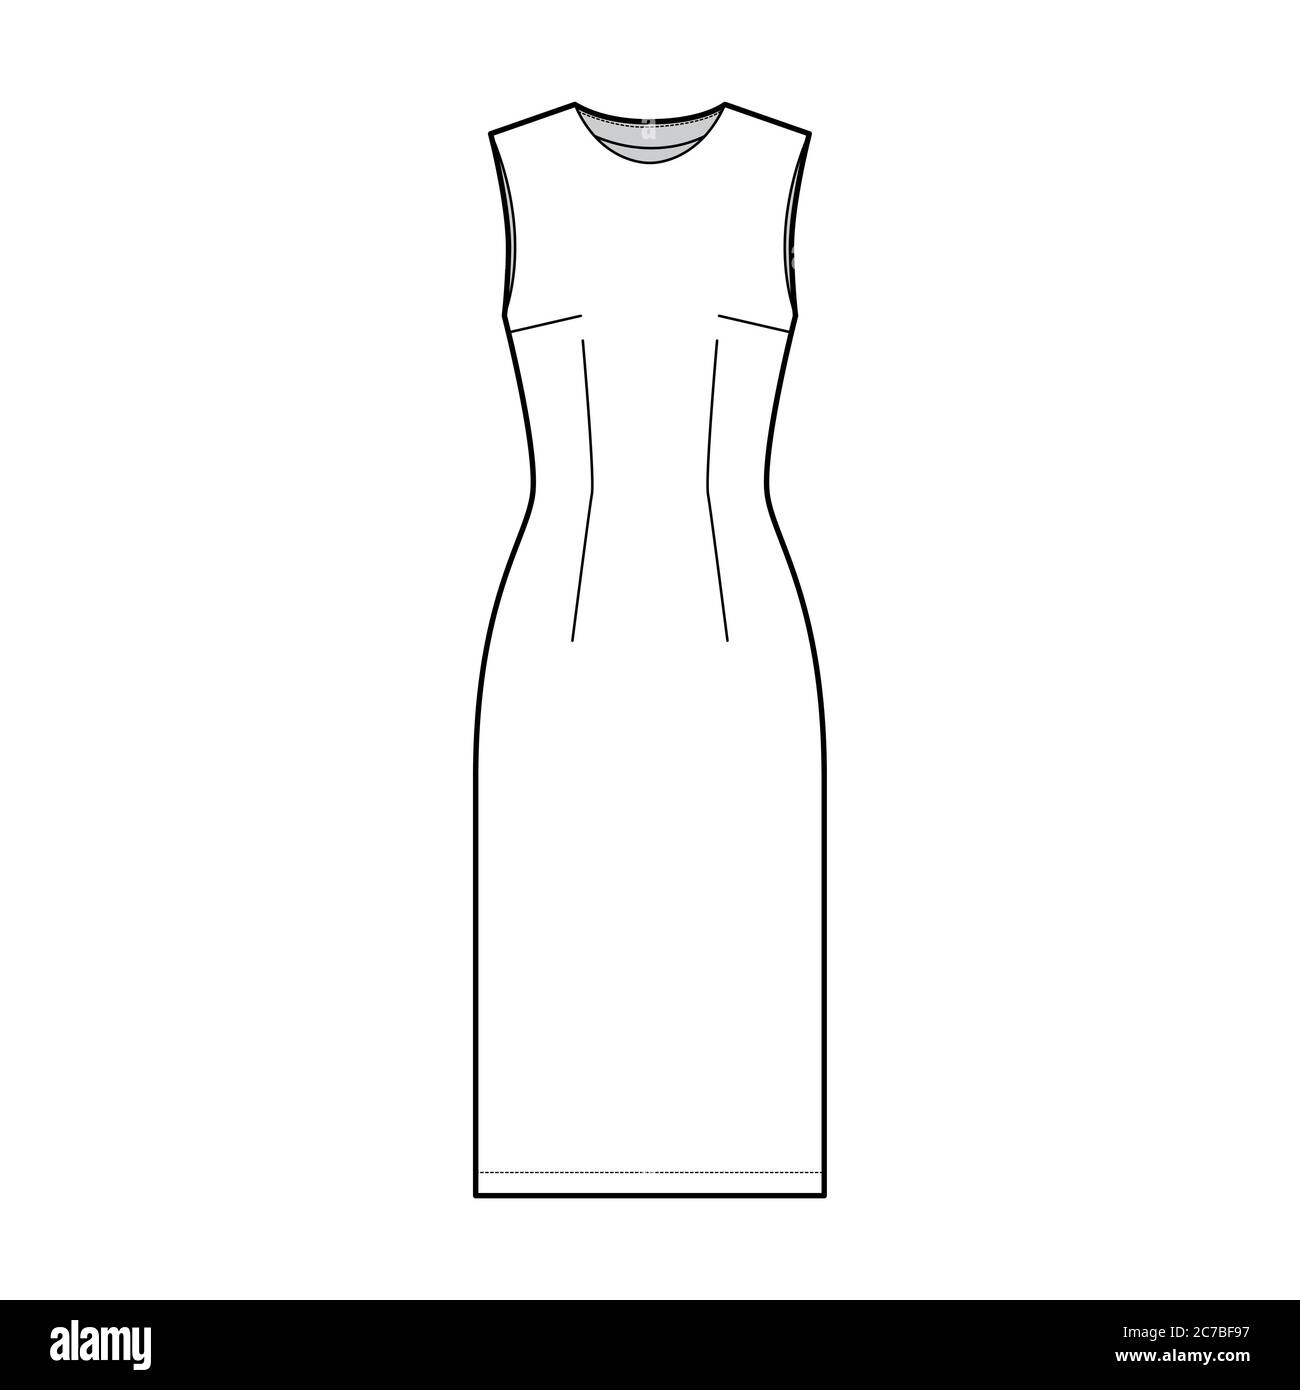 Premium Vector  A line drawing of a sleeveless dress front and back  fashion cad vector illustration